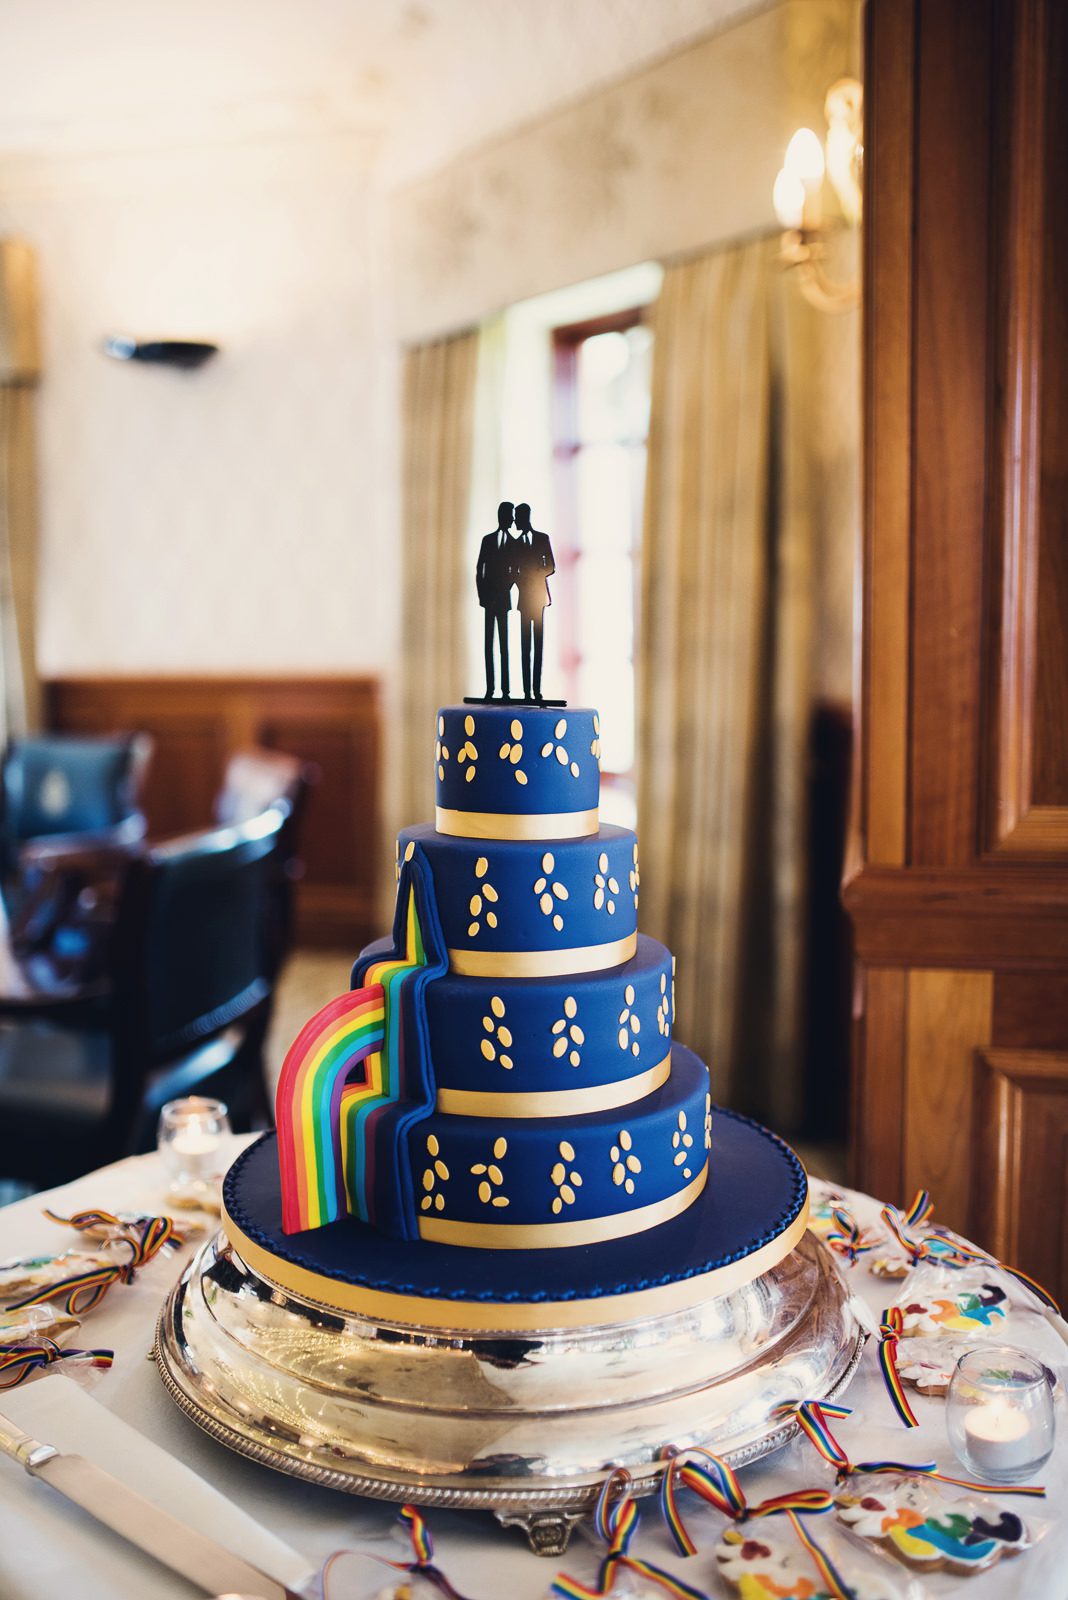 Fabulous blue multi tiered wedding cake for a same sex wedding featuring a rainbow and two grooms silhouette.